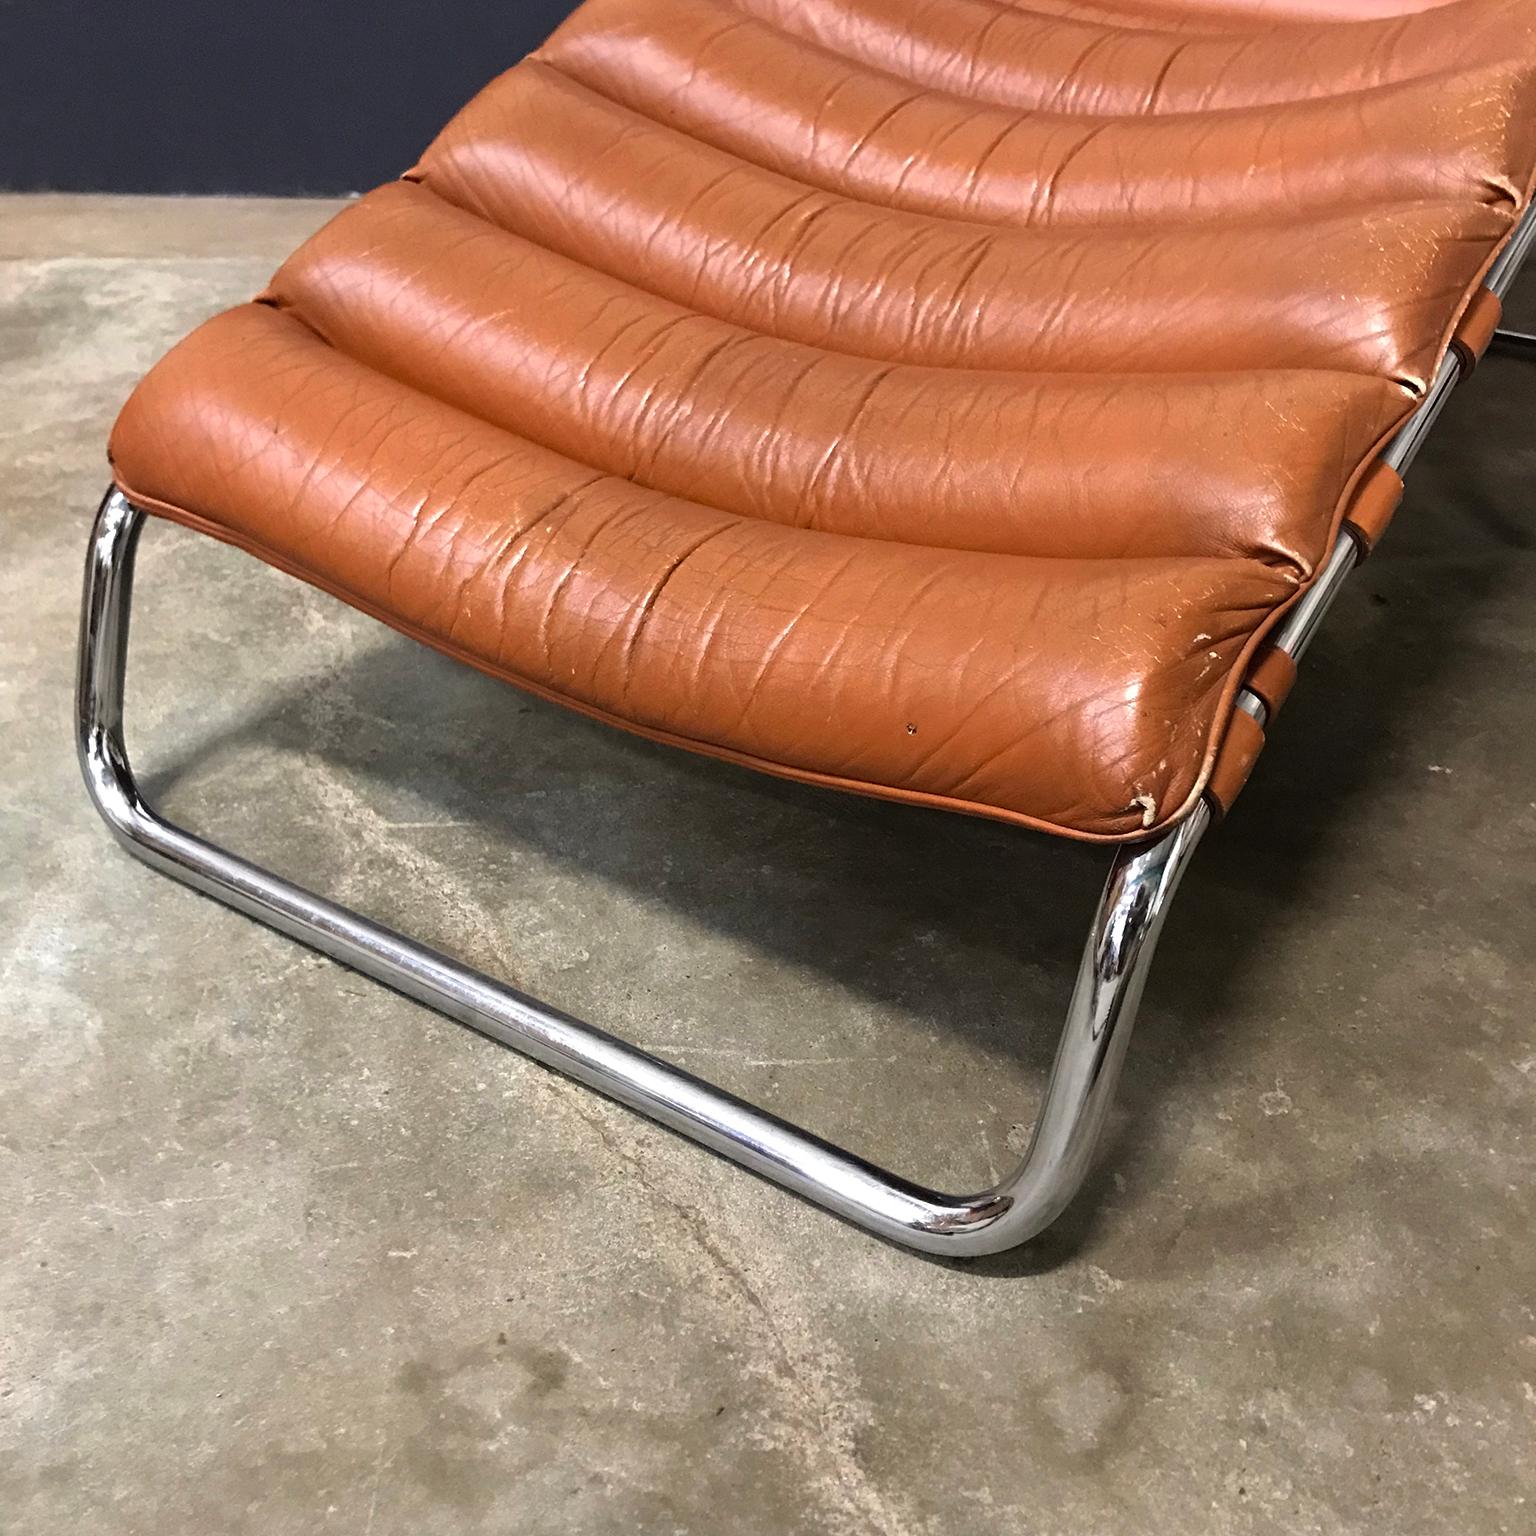 1965, Ludwig Mies van der Rohe, Rare Early Production Adjustable Chaise Longue 3